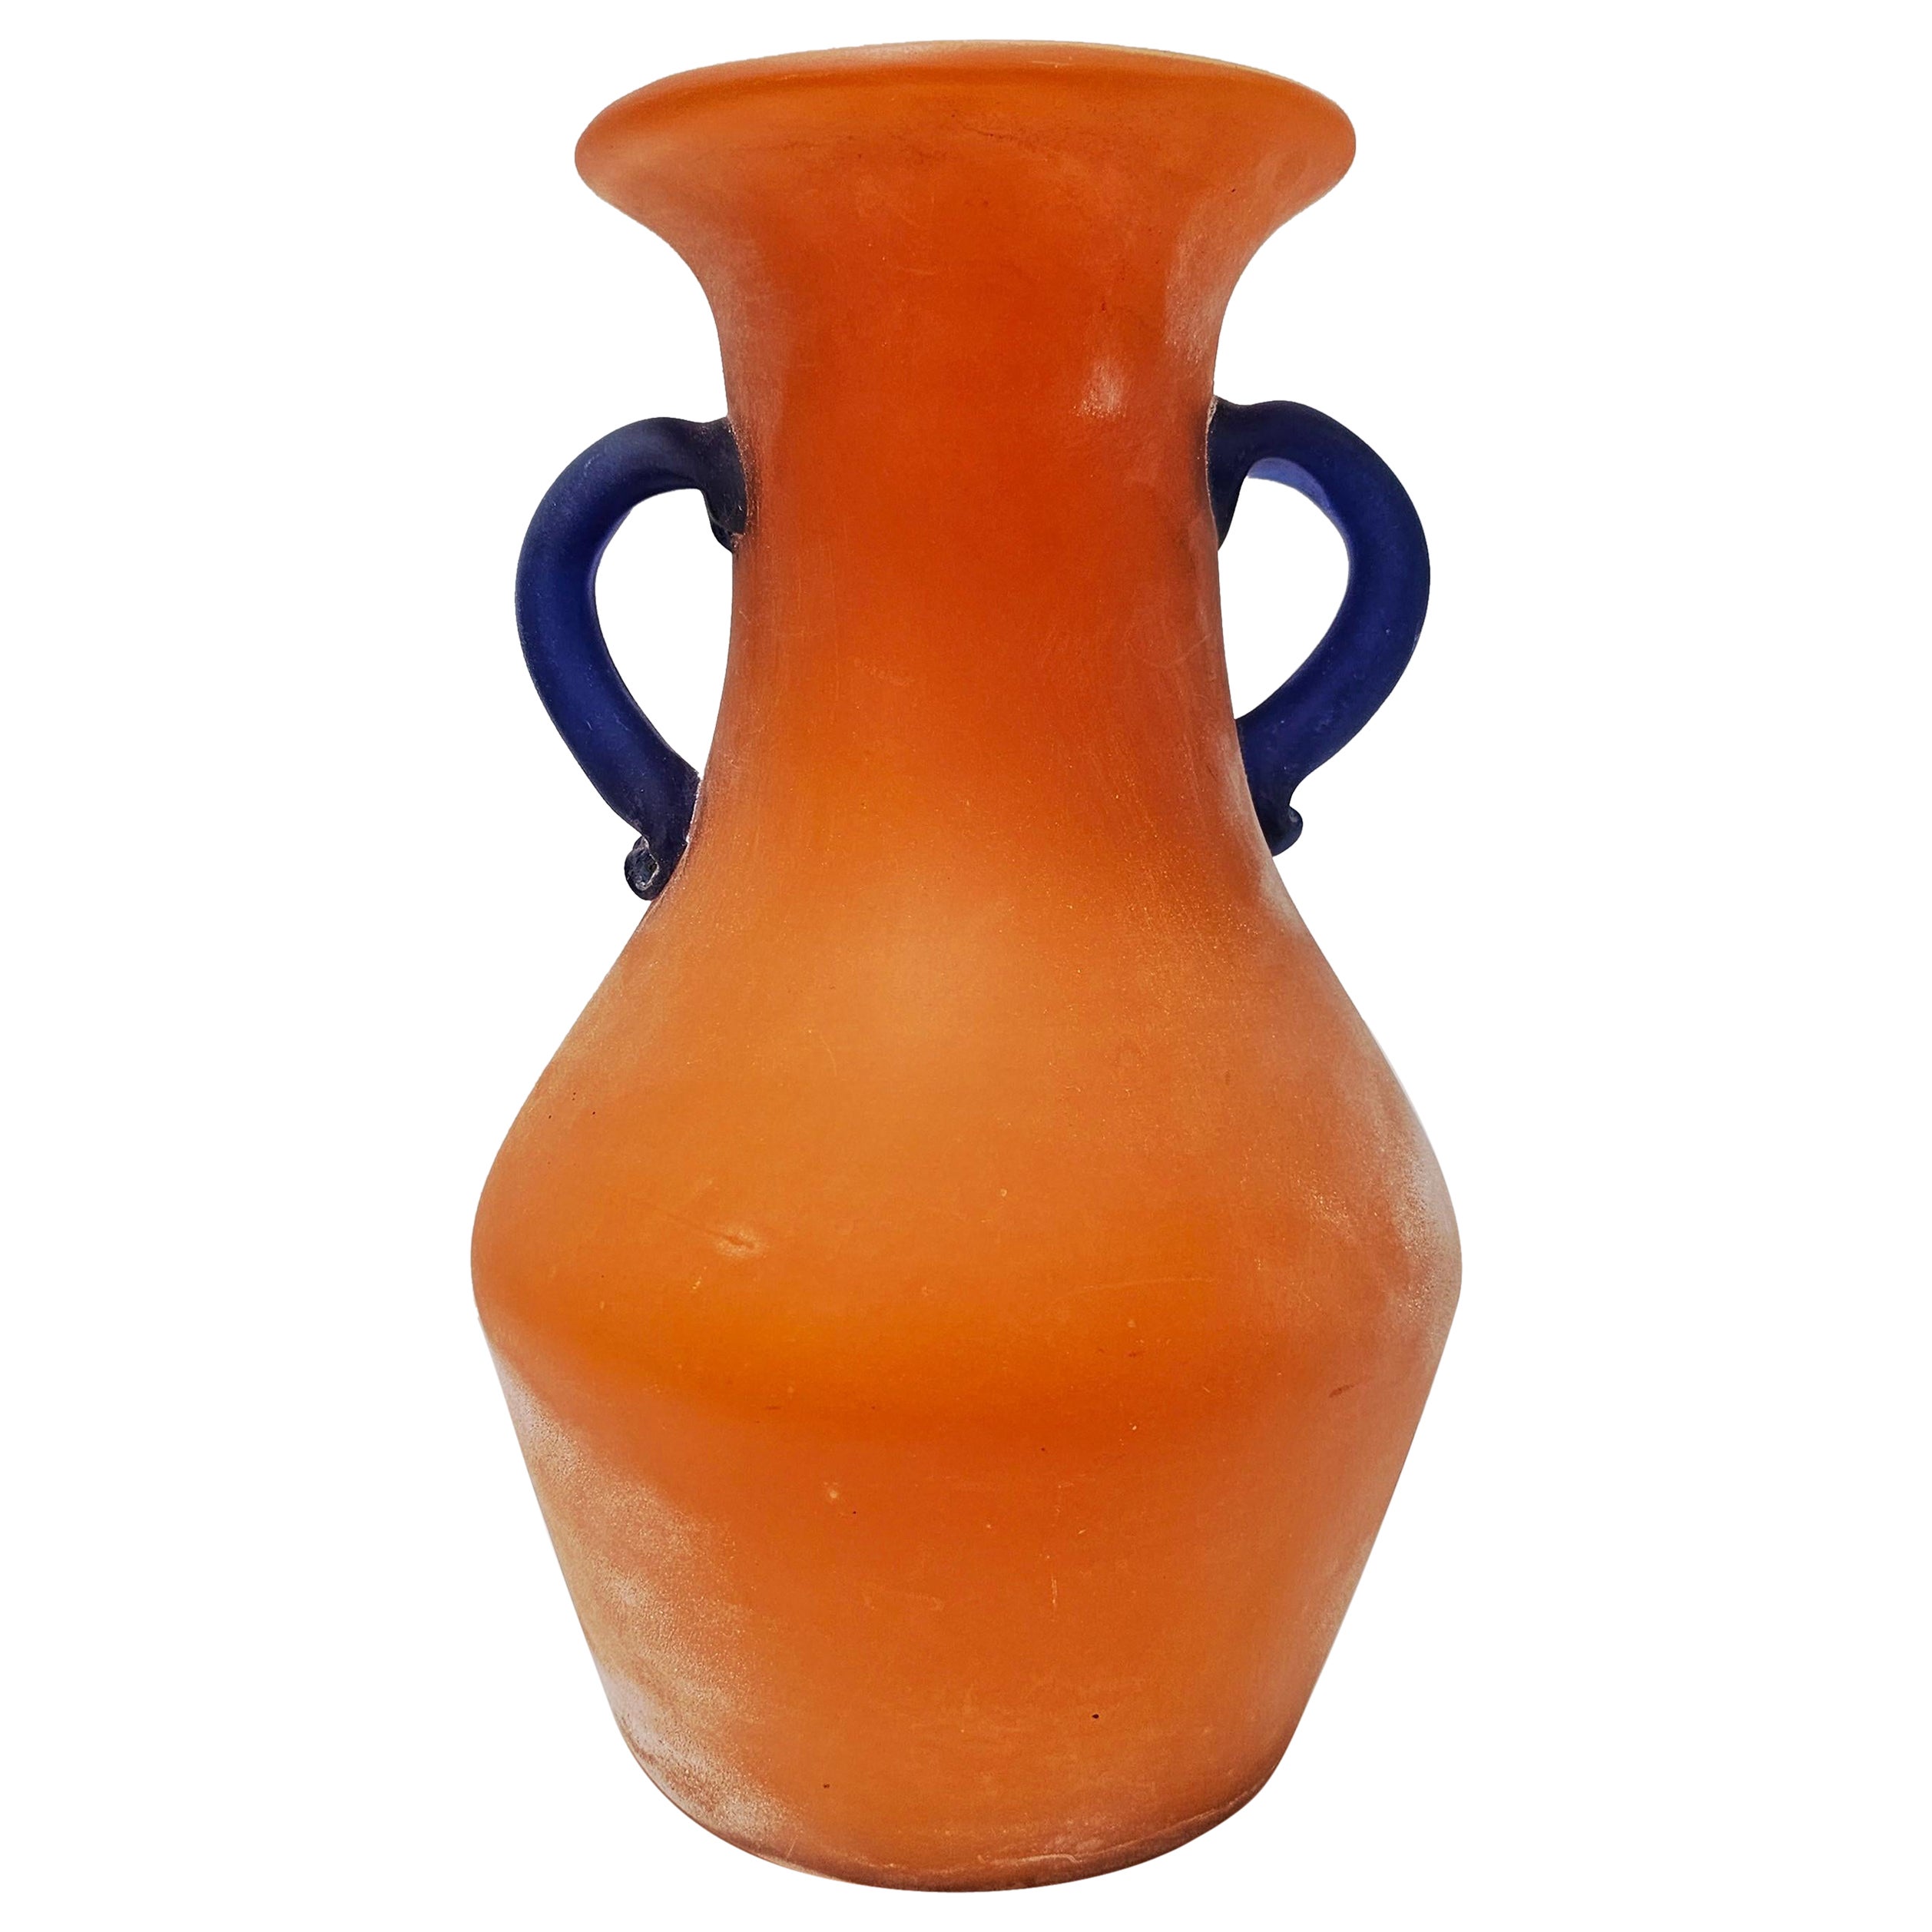 Orange Murano Glass Scavo Vase By Carlo Moretti, Signed by author, Italy 1970s